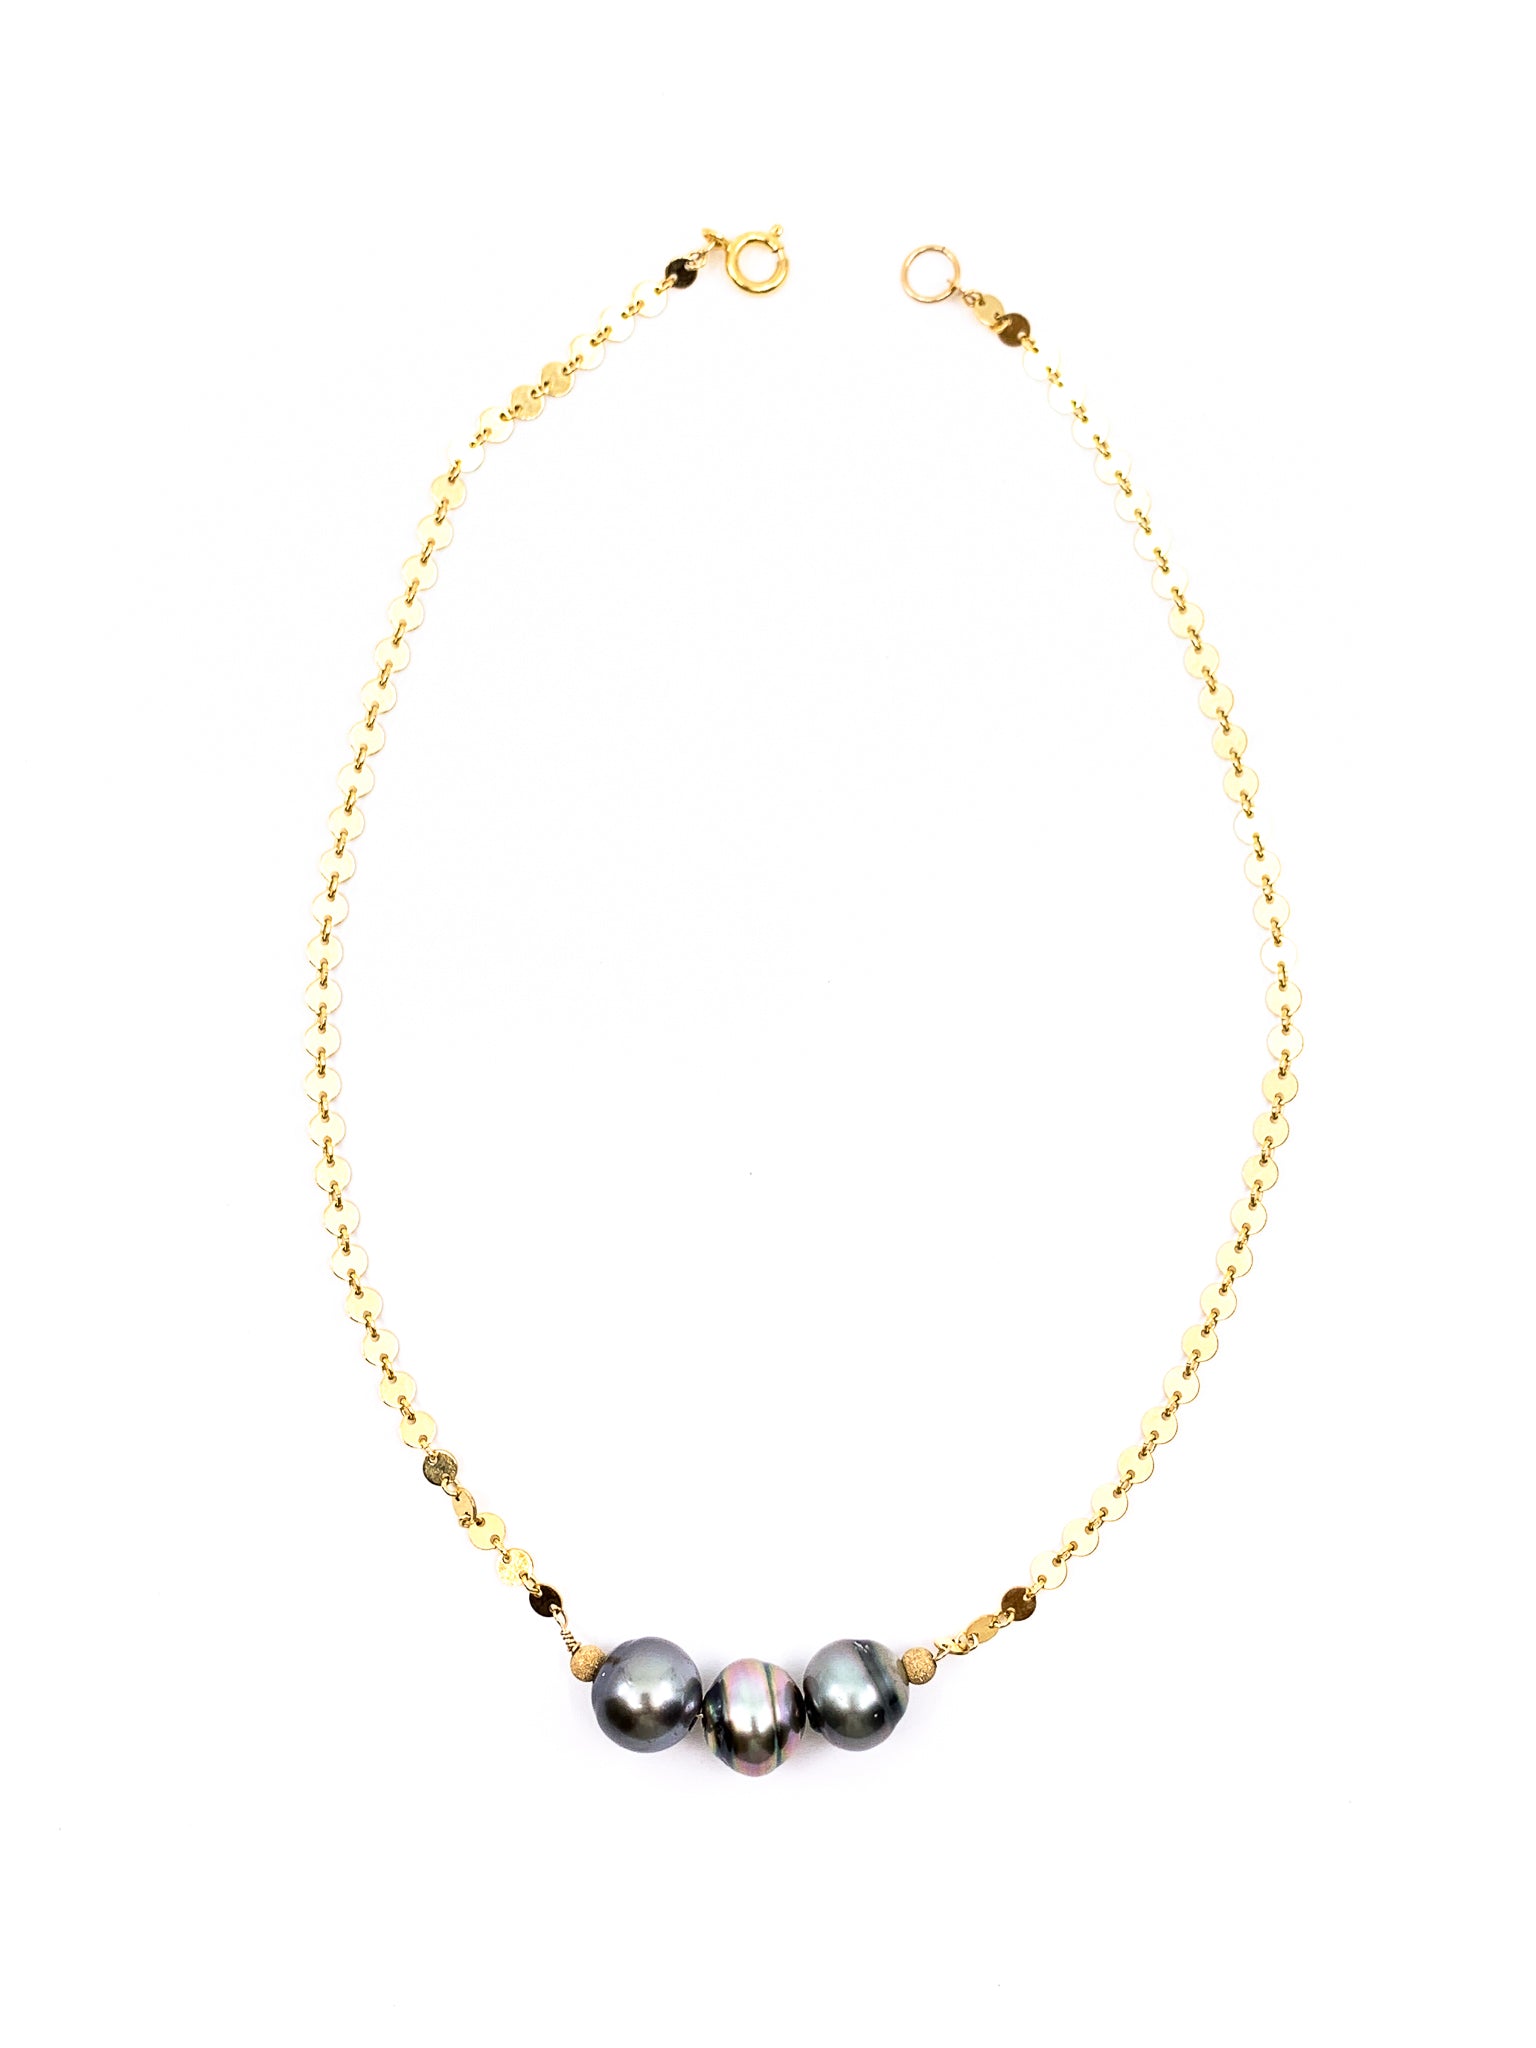 3 tahitian pearls gold chain necklace by eve black jewelry made in hawaii